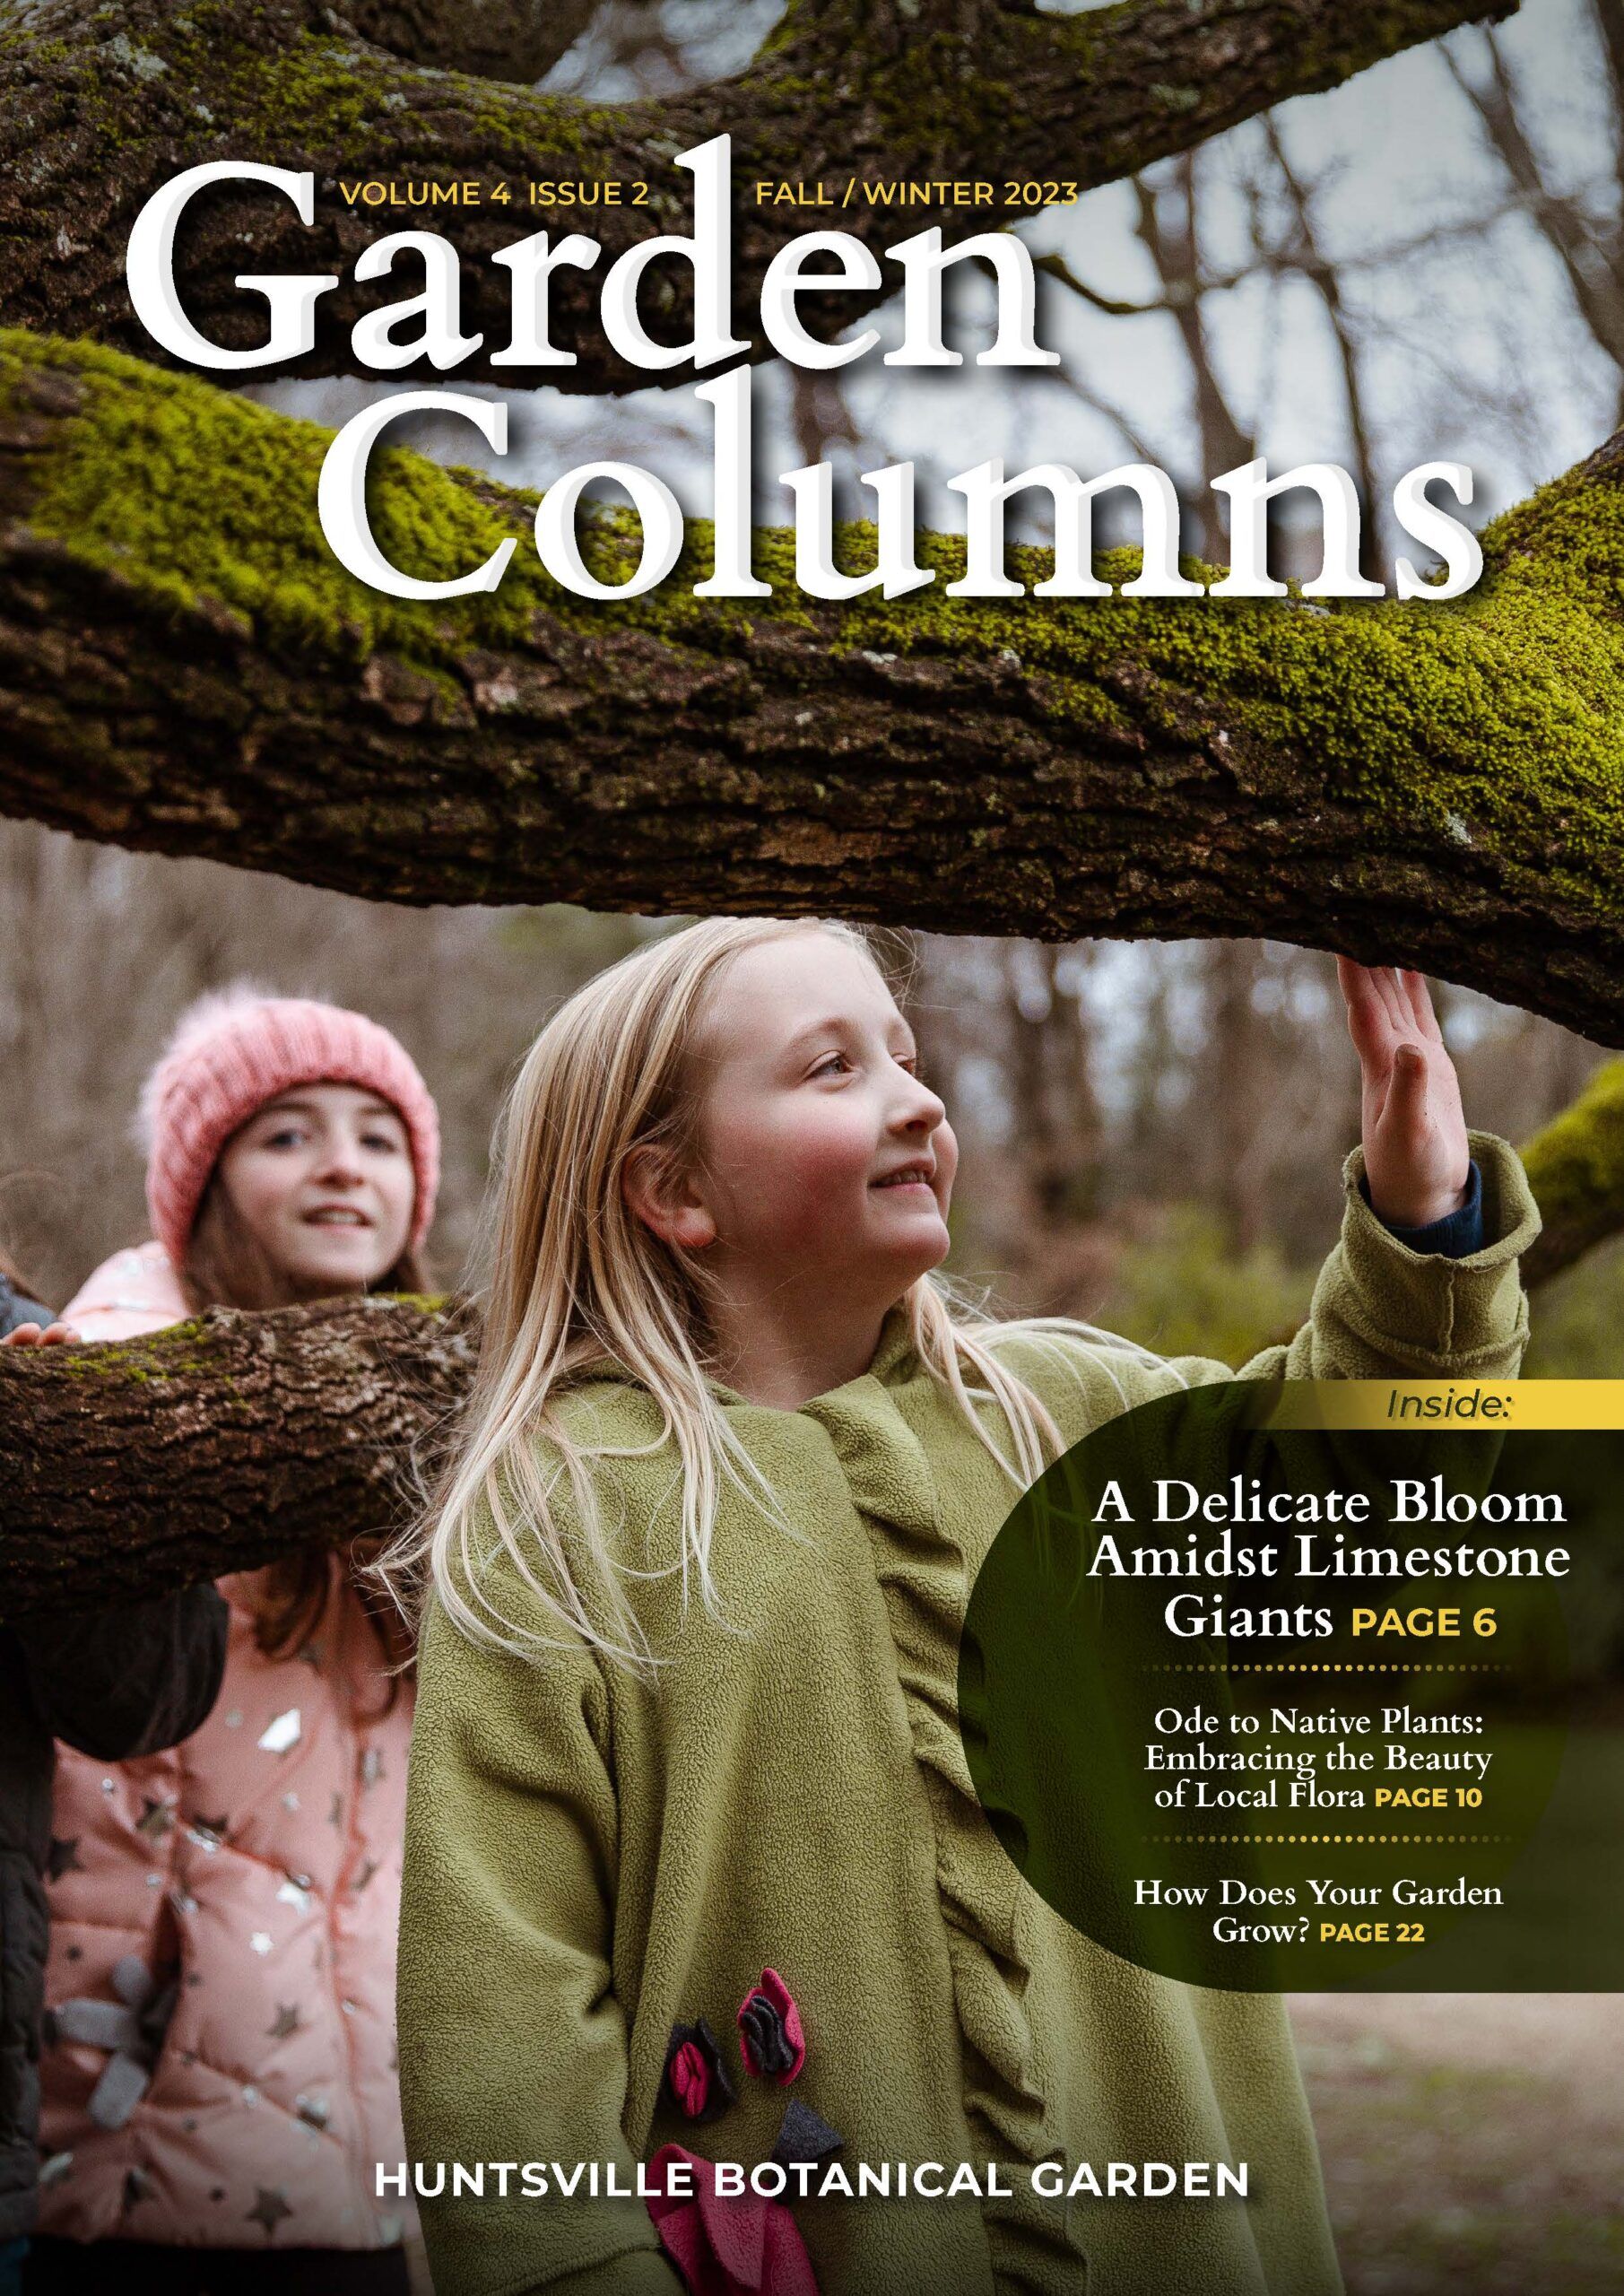 Magazine cover with two young girls touching moss on a tree